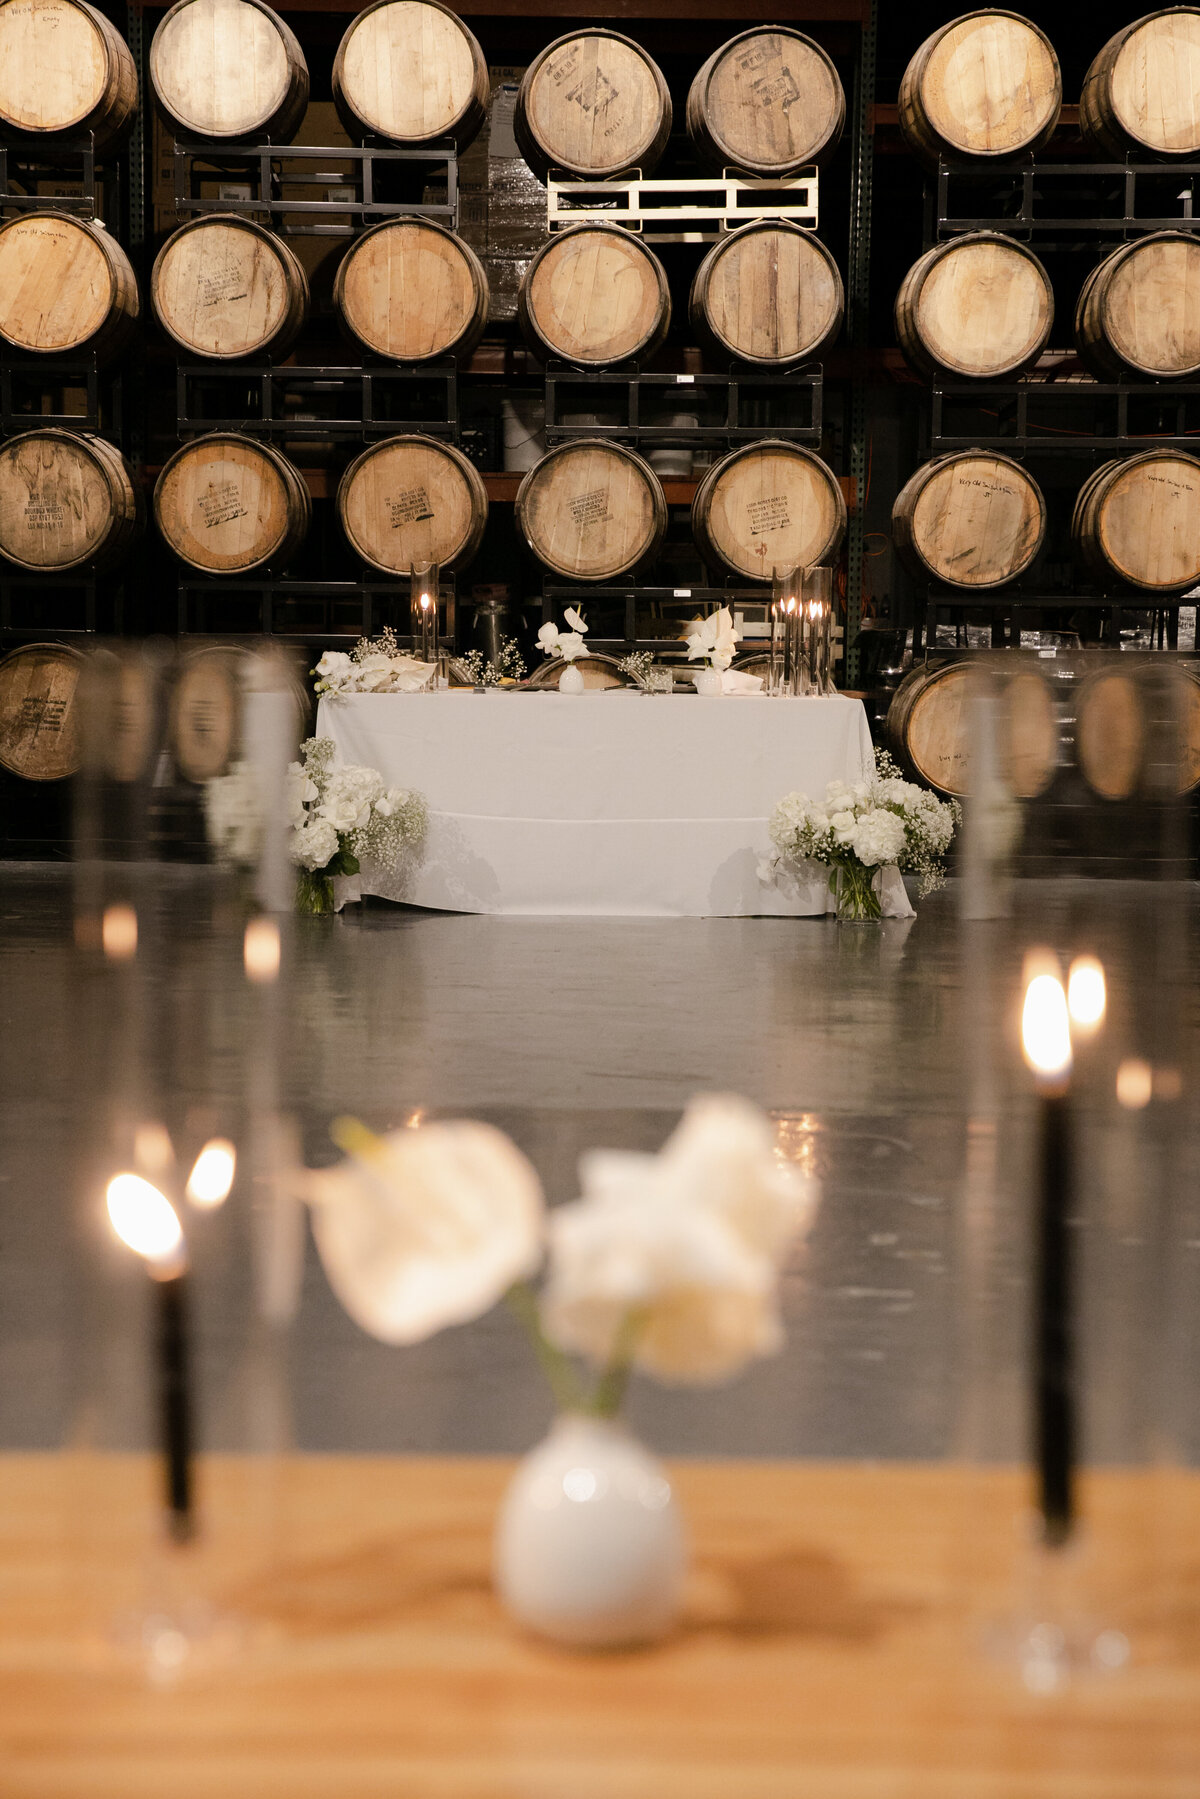 Minimalist wedding centerpieces are displayed with black candles and a white vase with white lilies out of focus and beer barrels at Moody Tongue Brewery in the background.